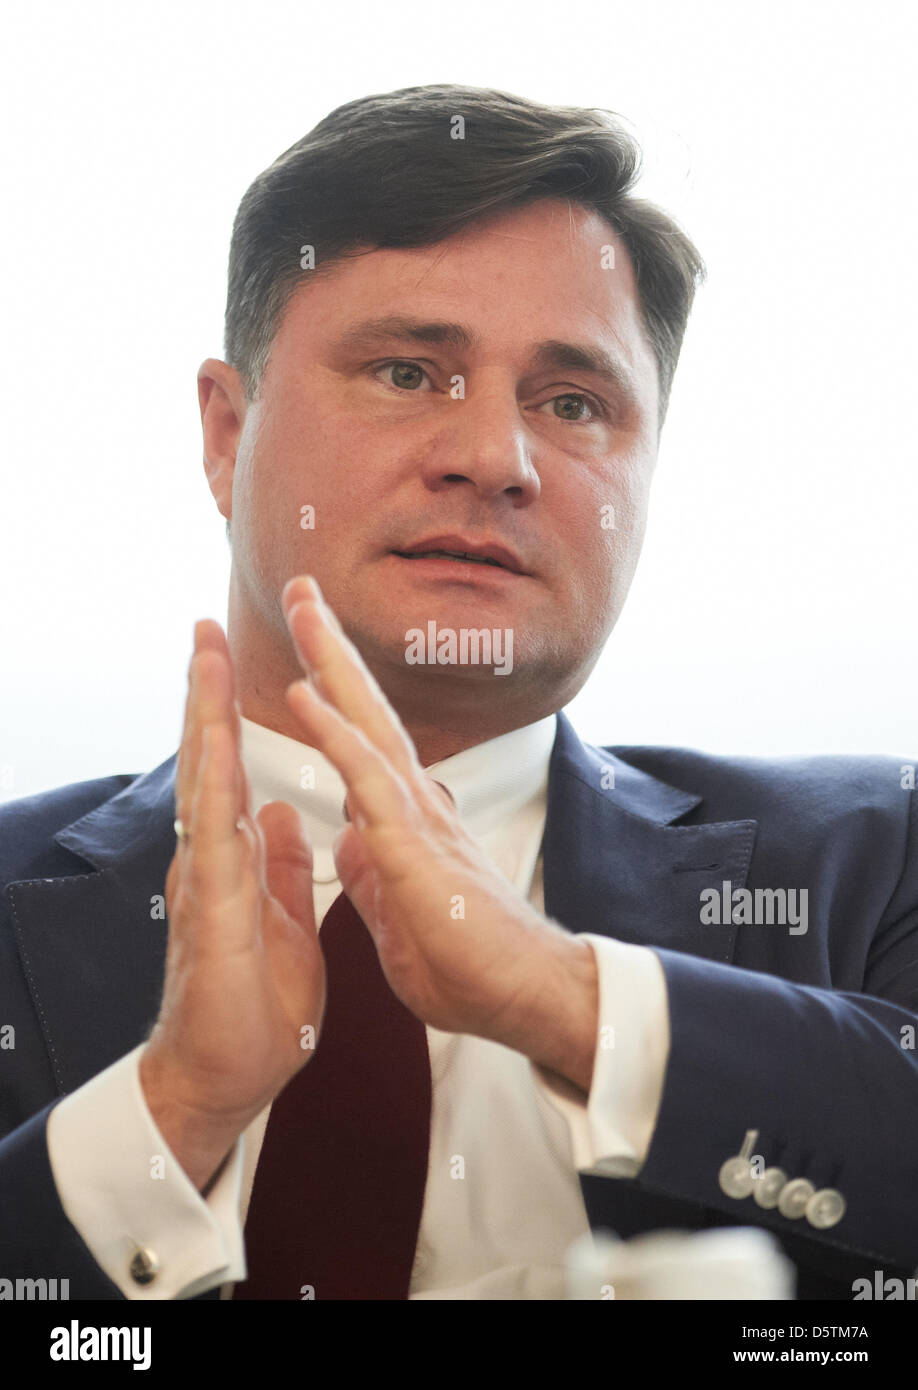 Erol Thomas Isim, CEO of Toennies subsidiary Pharma Action, is pictured during a press conference in Rheda-Wiedenbrueck, Germany, 28 November 2012. - erol-thomas-isim-ceo-of-toennies-subsidiary-pharma-action-is-pictured-D5TM7A